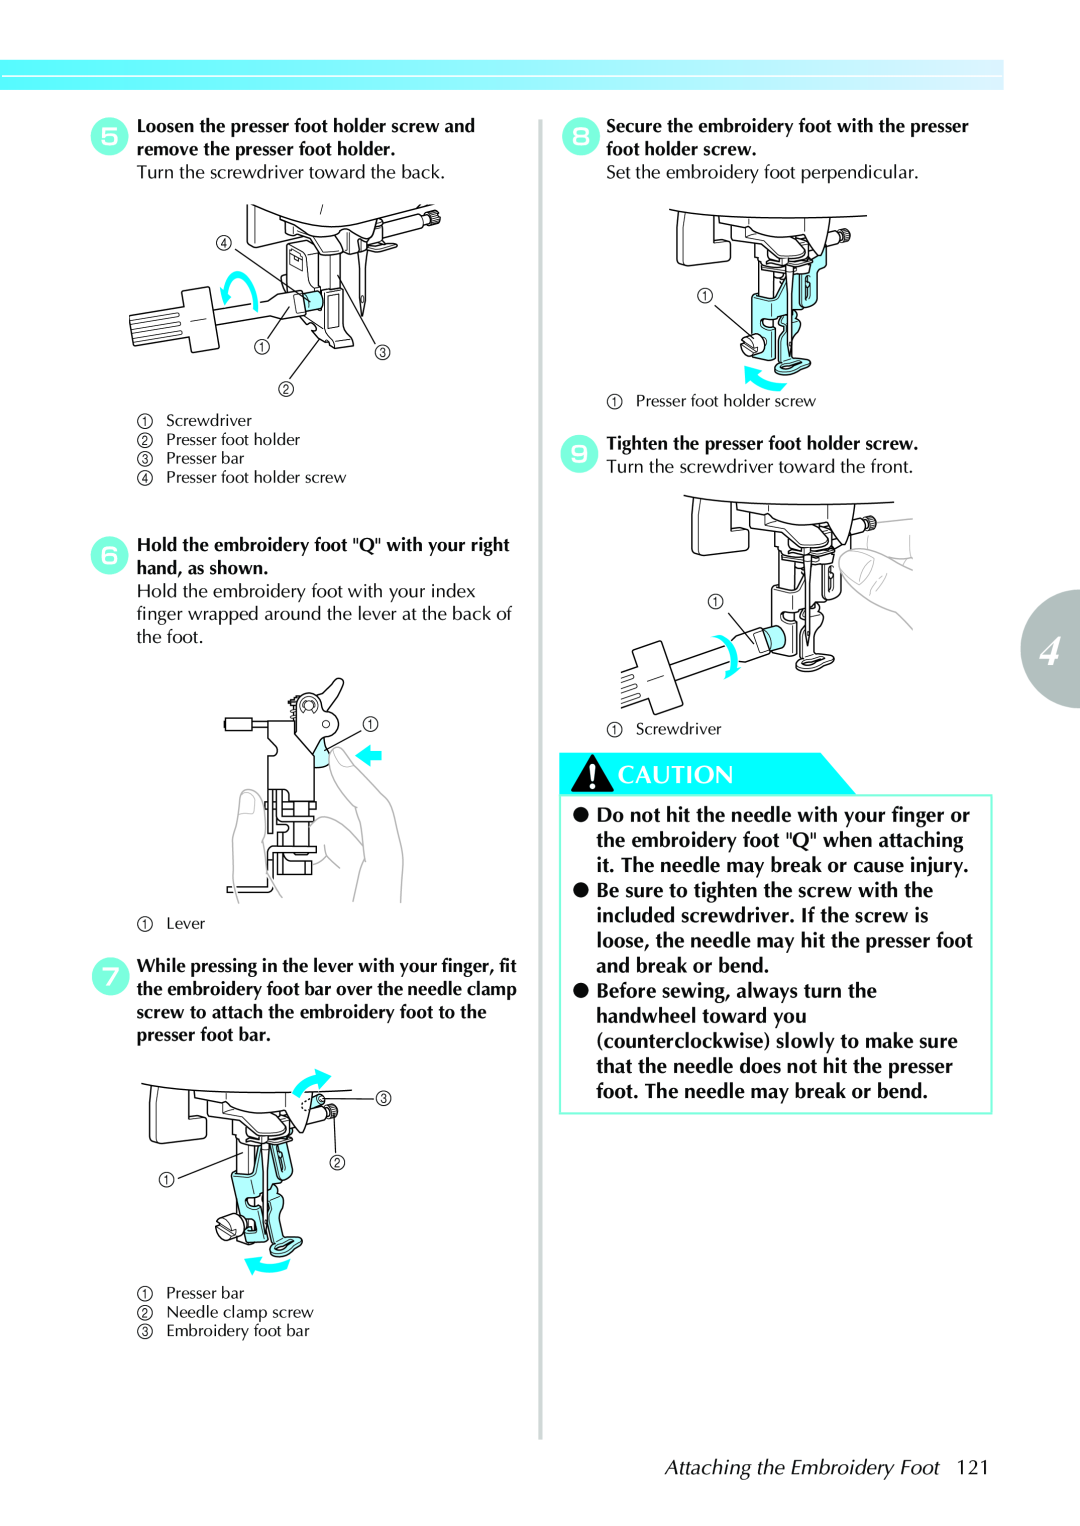 Brother 885-V31, 885-V33 operation manual Attaching the Embroidery Foot 